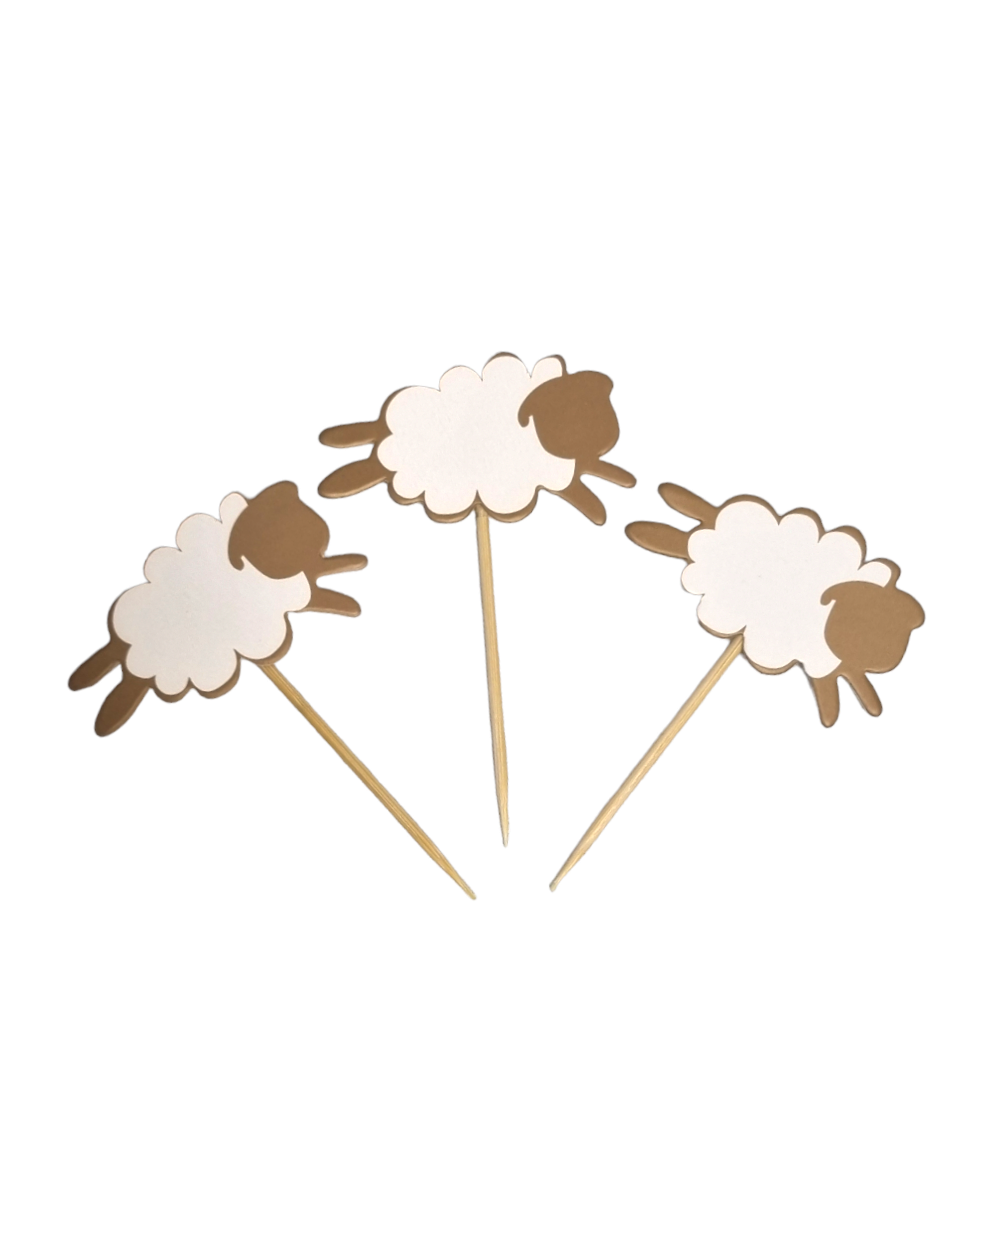 Cupcake Topper in the shape of a Sheep for Eid el Adha